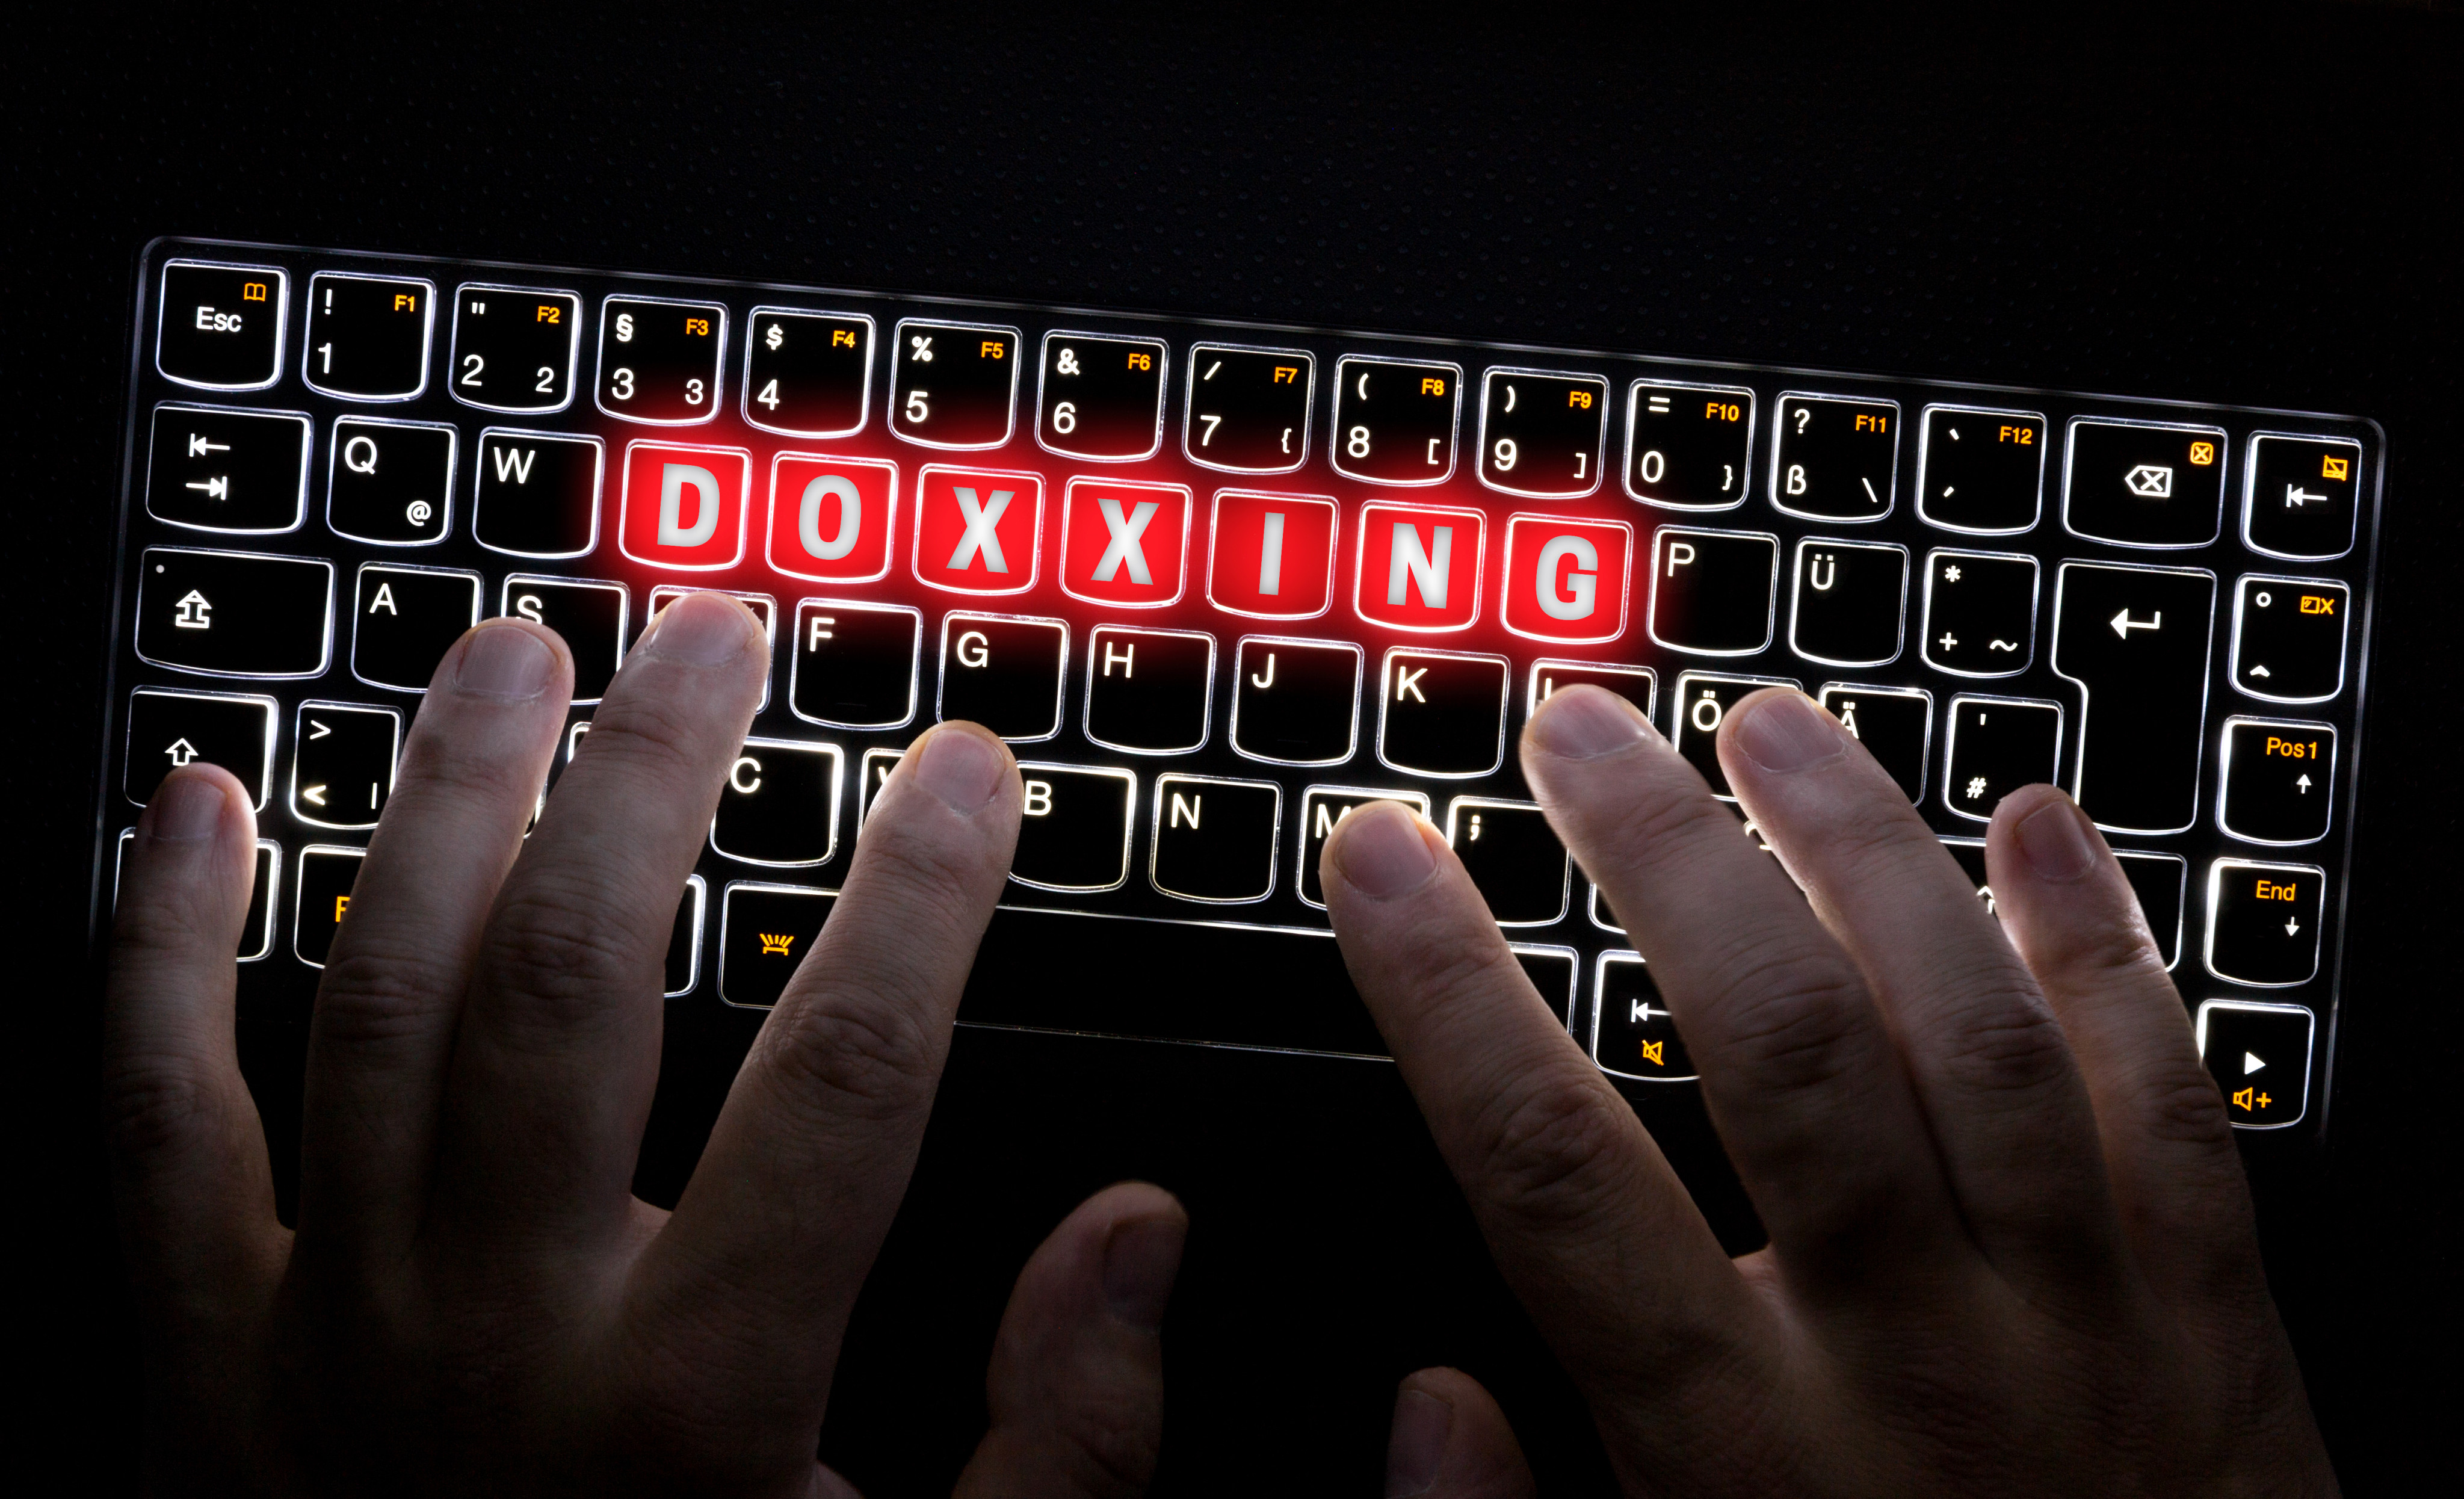 A new anti-doxxing law was implemented in the city in October 2021. Photo: Shutterstock